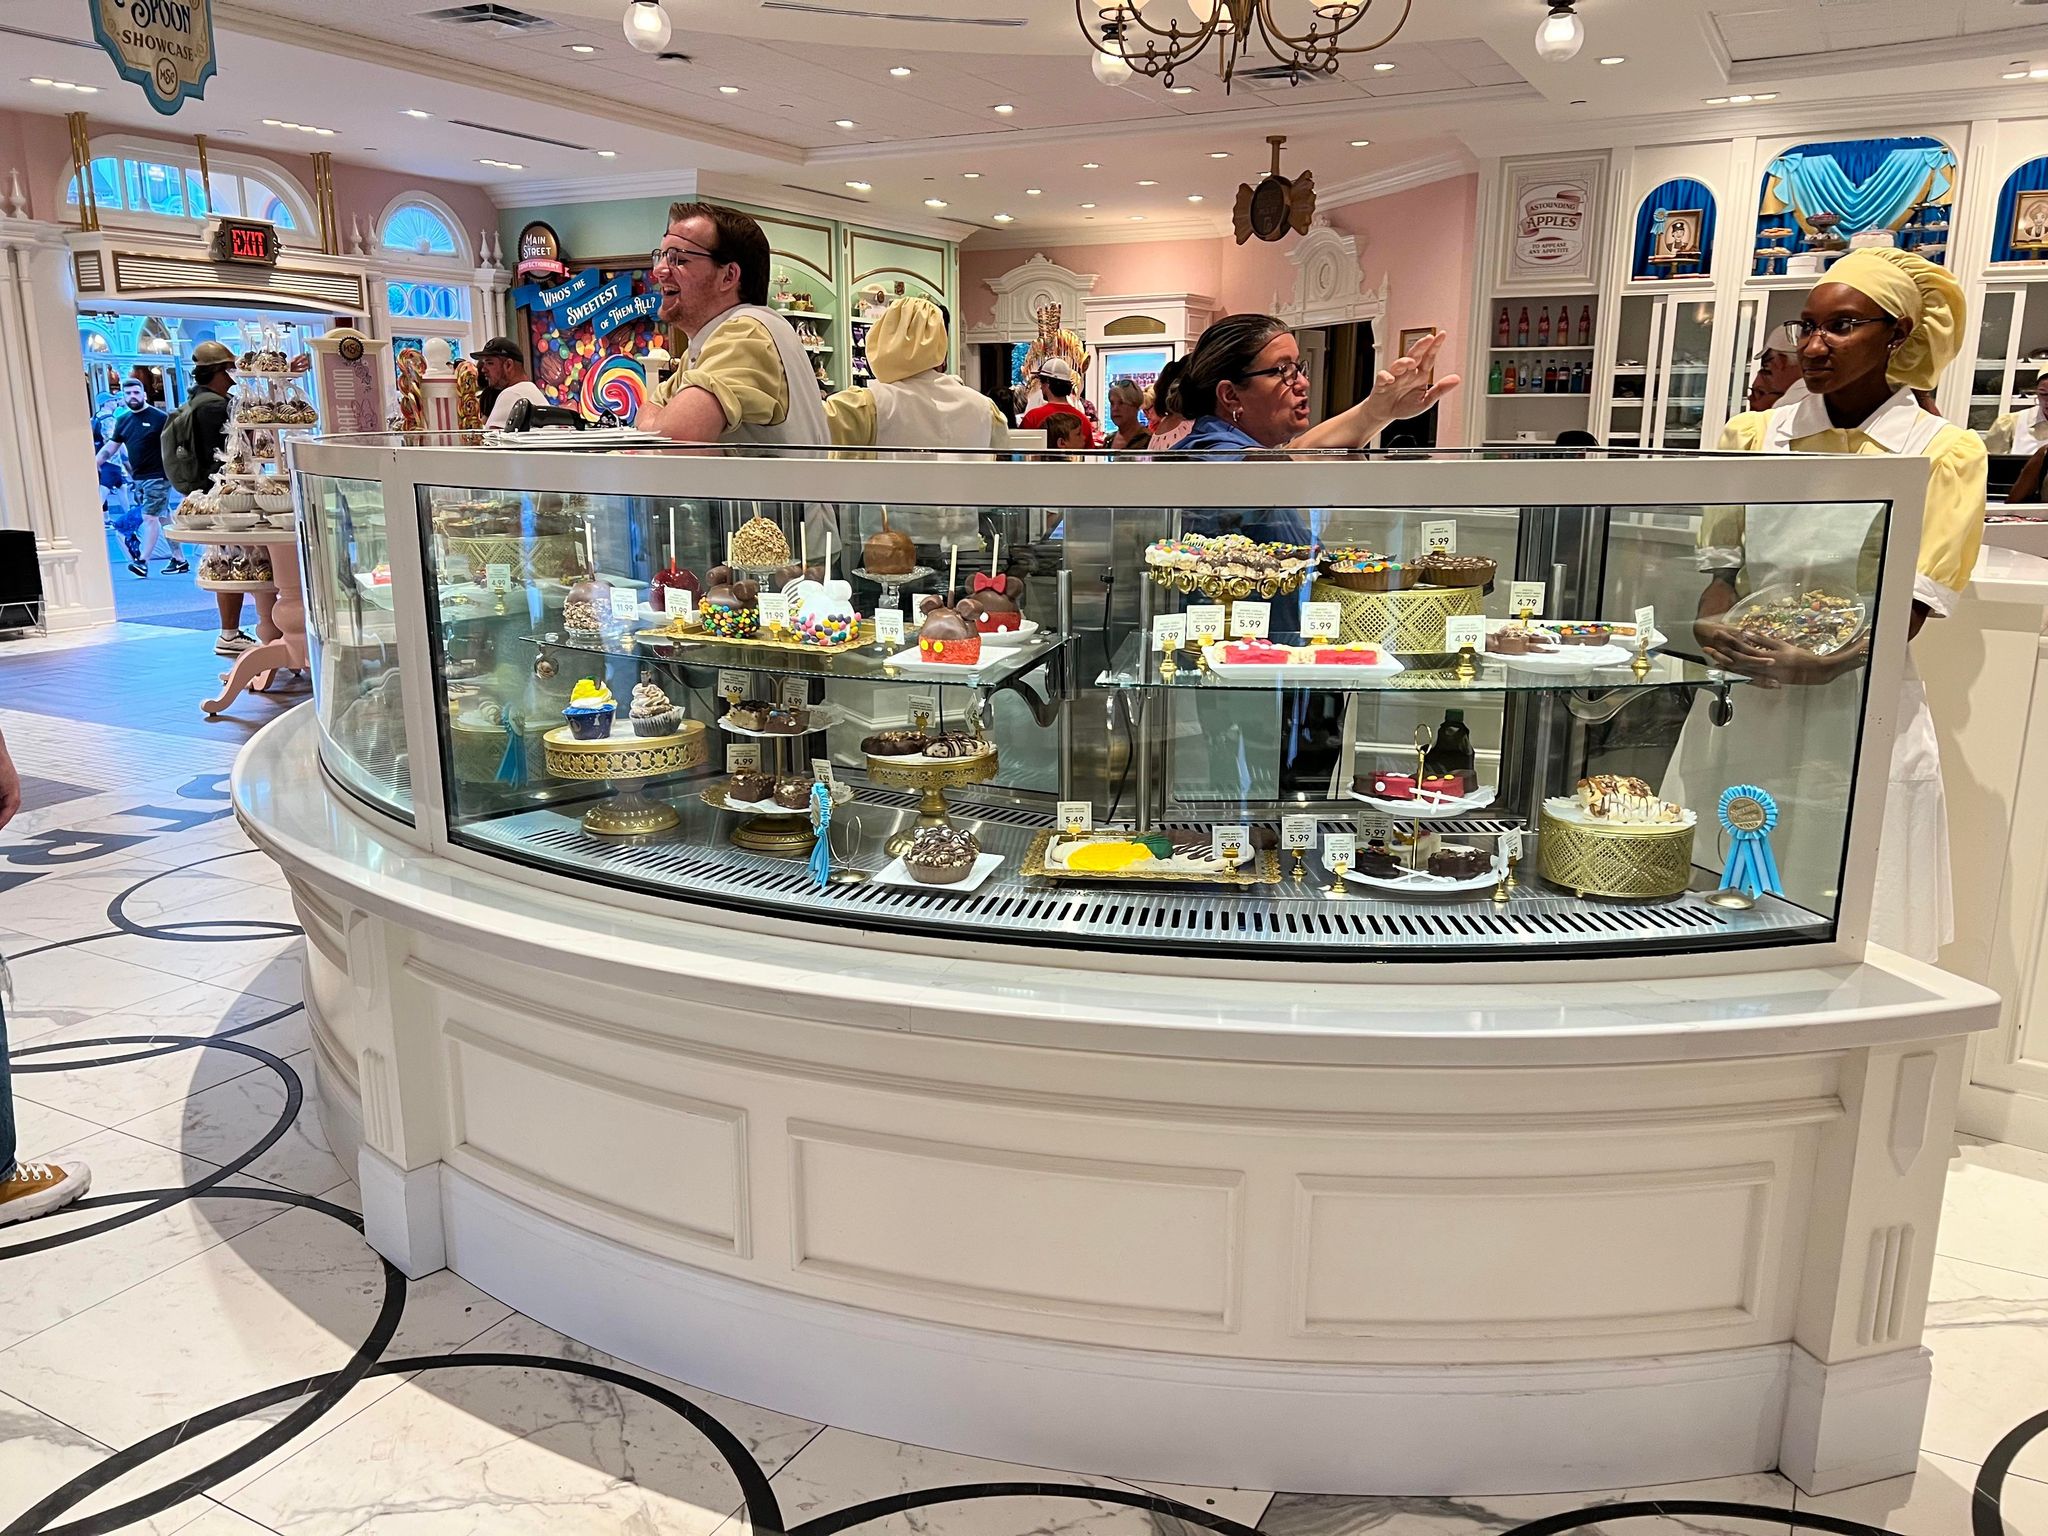 See What's Cooking In the Beautifully Remodeled Main Street Confectionary Magic Kingdom 2